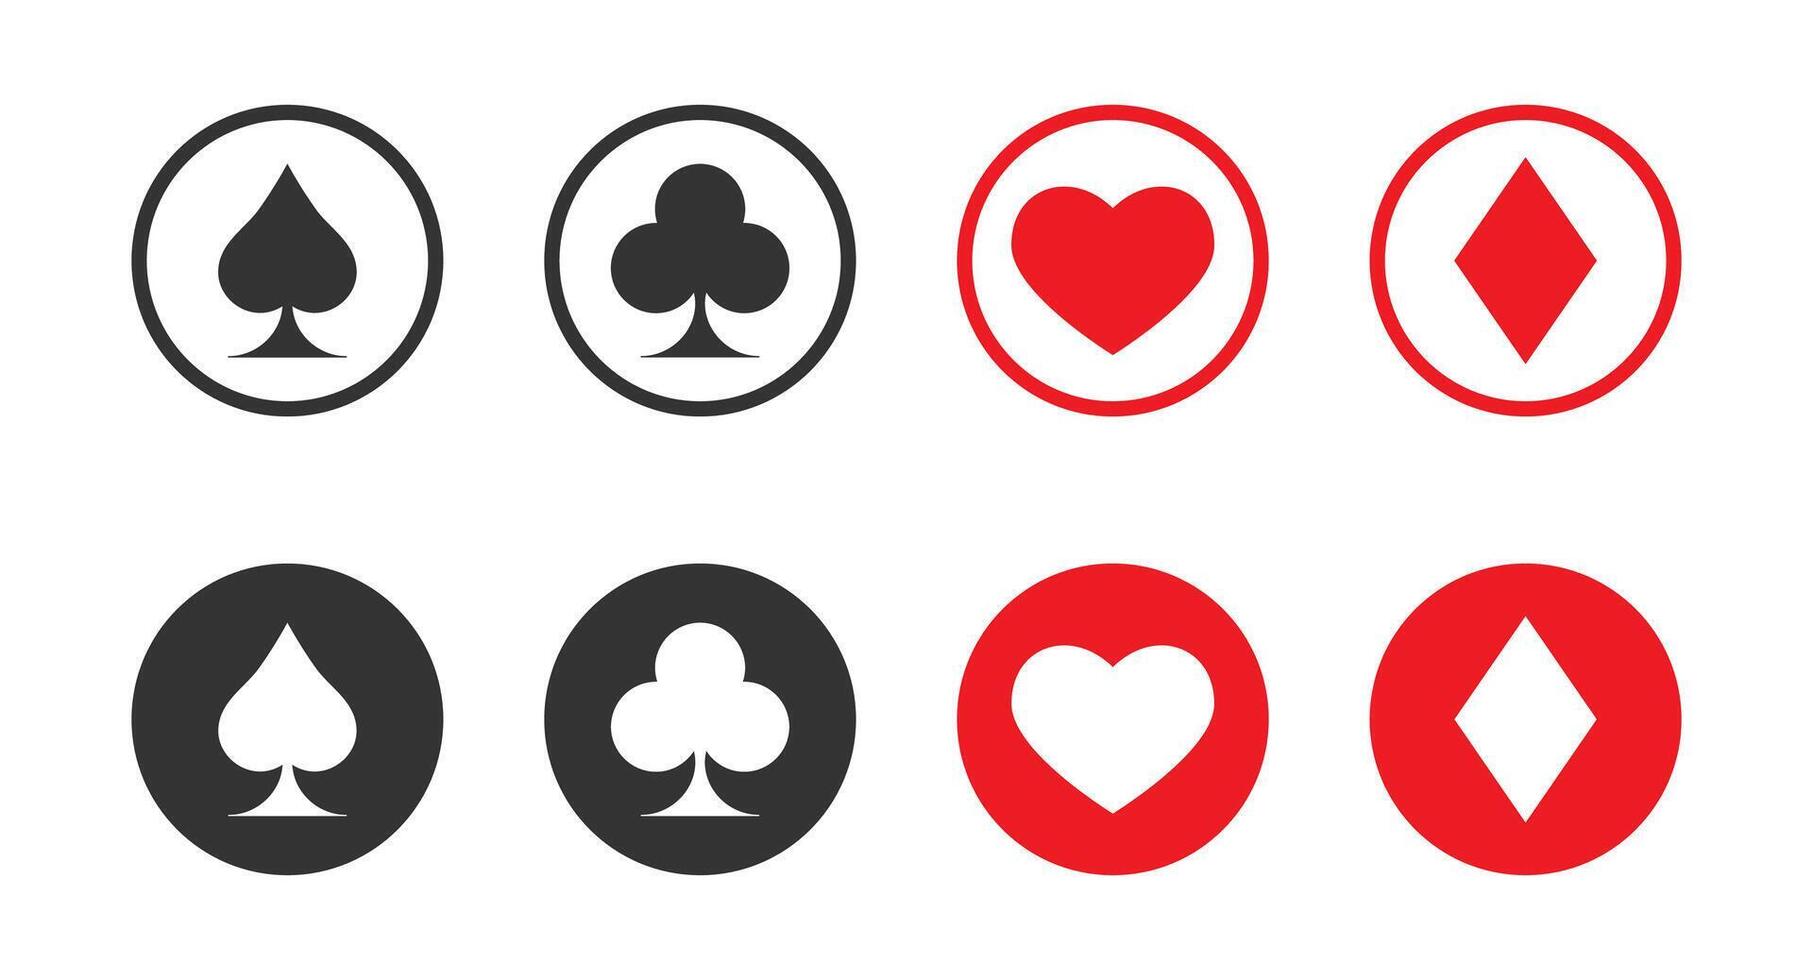 Playing card suits icons. Poker card symbols. Flat vector illustration.